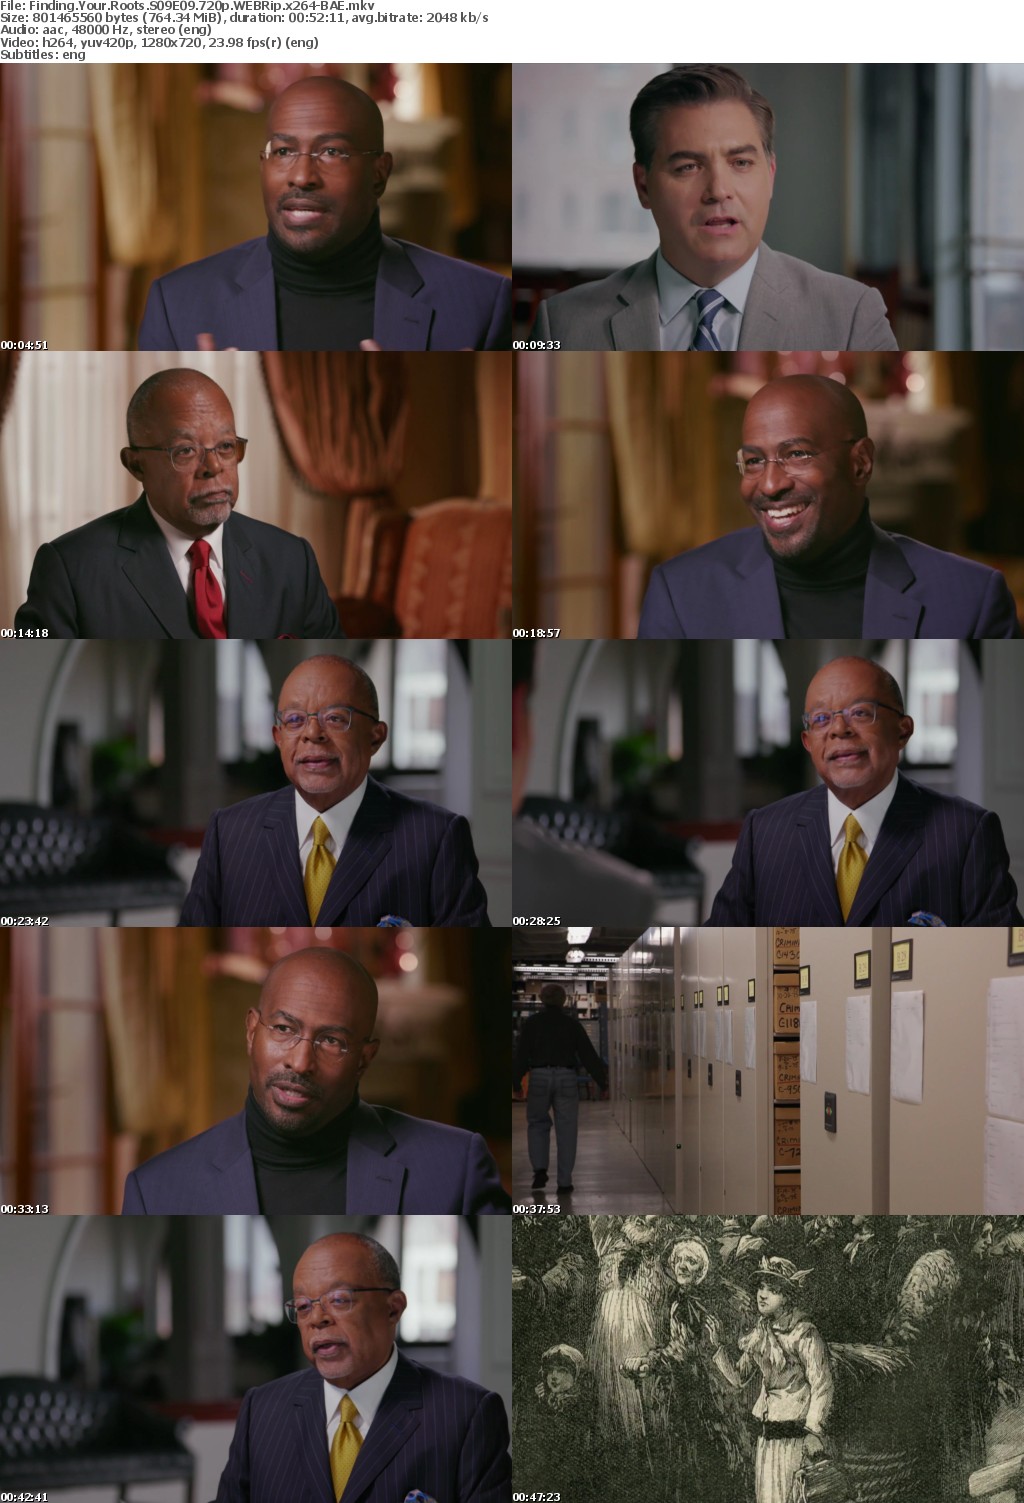 Finding Your Roots S09E09 720p WEBRip x264-BAE